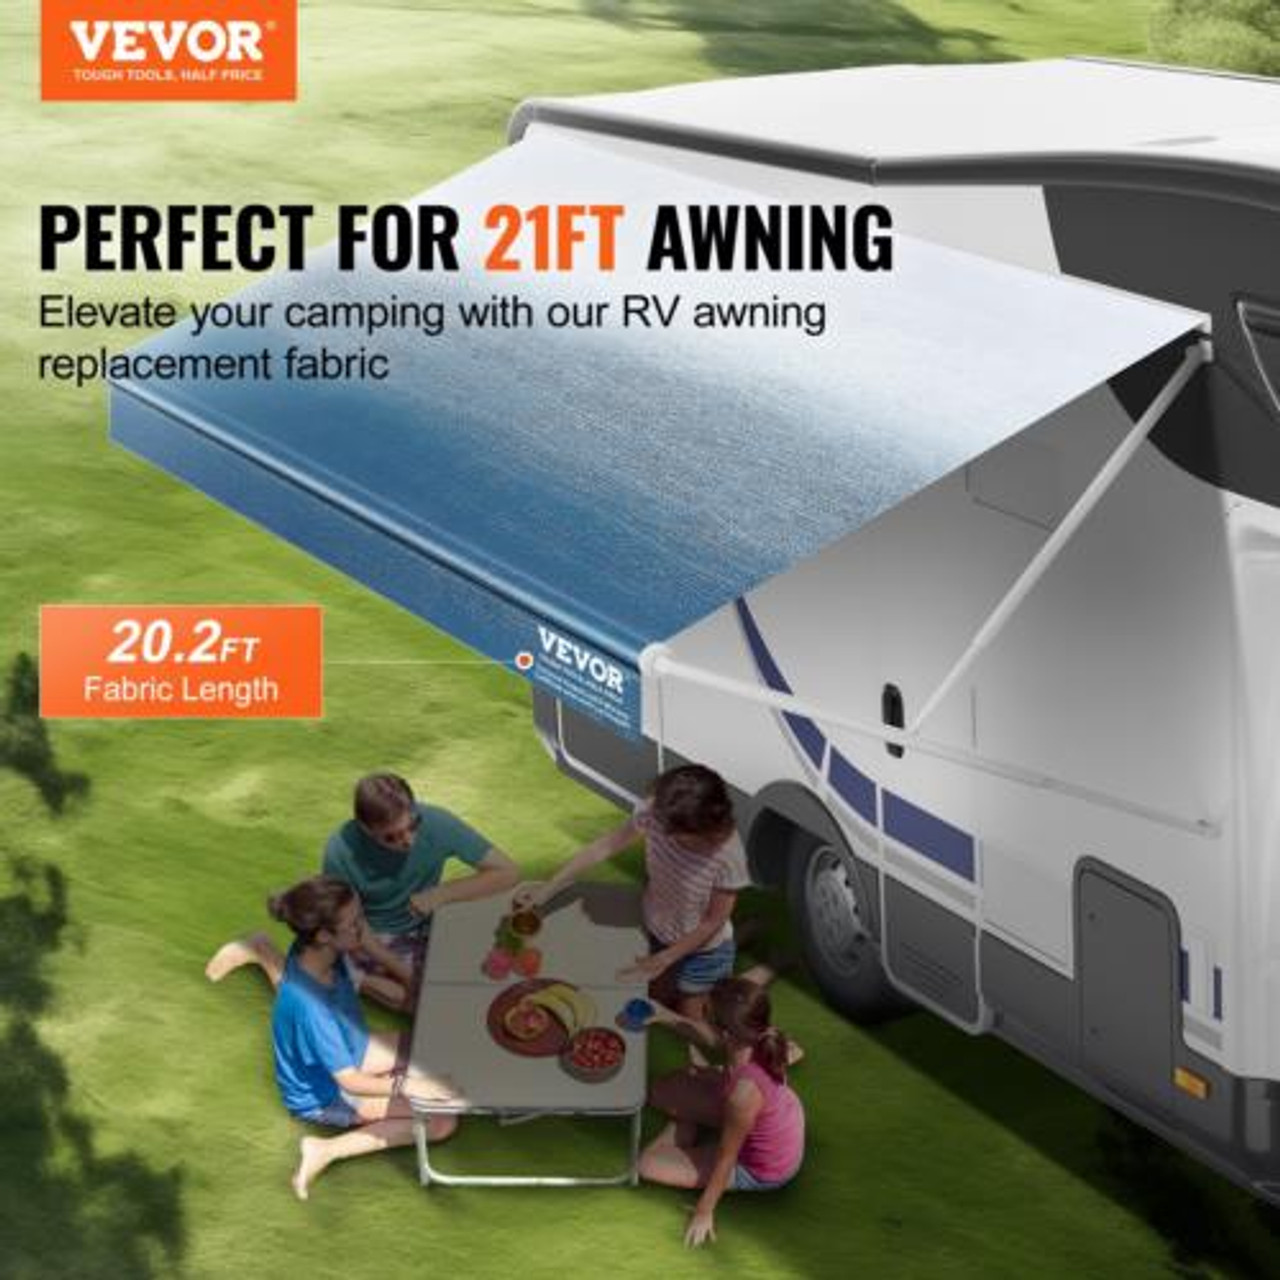 VEVOR RV Awning Fabric Replacement, 20'2" Fabric Length for 21' Awning, Heavy Du